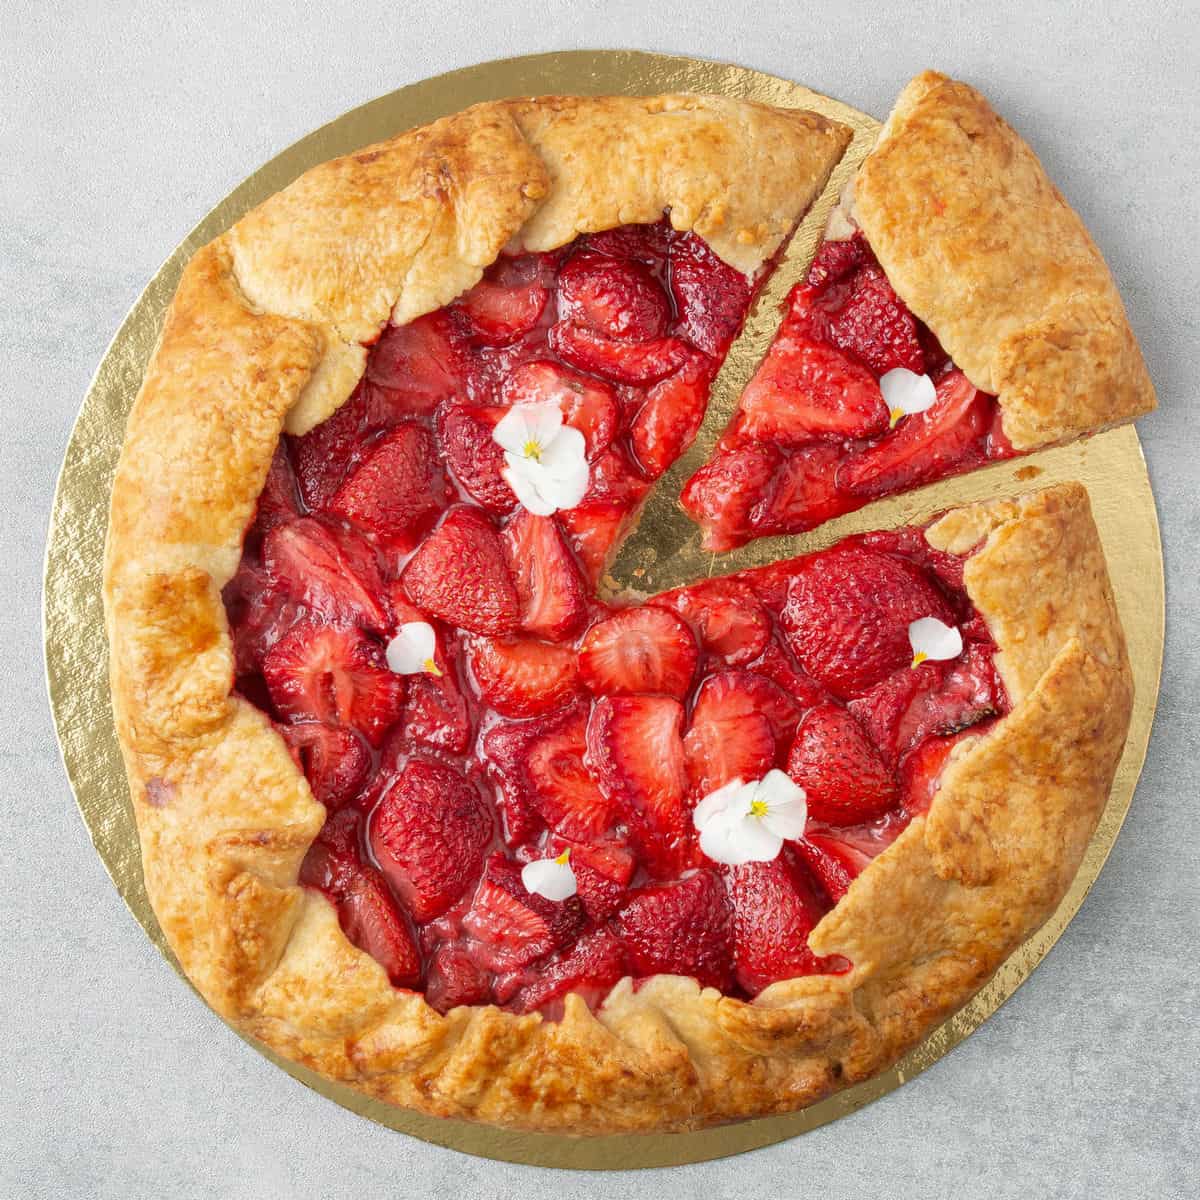 <p>A <a href="https://www.spatuladesserts.com/easy-strawberry-galette-recipe/">Strawberry galette</a> is such an easy dessert to make for International Women´s Day and works wonderfully well after brunch. Even if you are a complete beginner in the kitchen, you can definitely make this recipe. Serve with whipped cream or even ice cream for a decadent finish.</p> <p><strong>Recipe: <a href="https://www.spatuladesserts.com/easy-strawberry-galette-recipe/">Strawberry galette</a></strong></p>